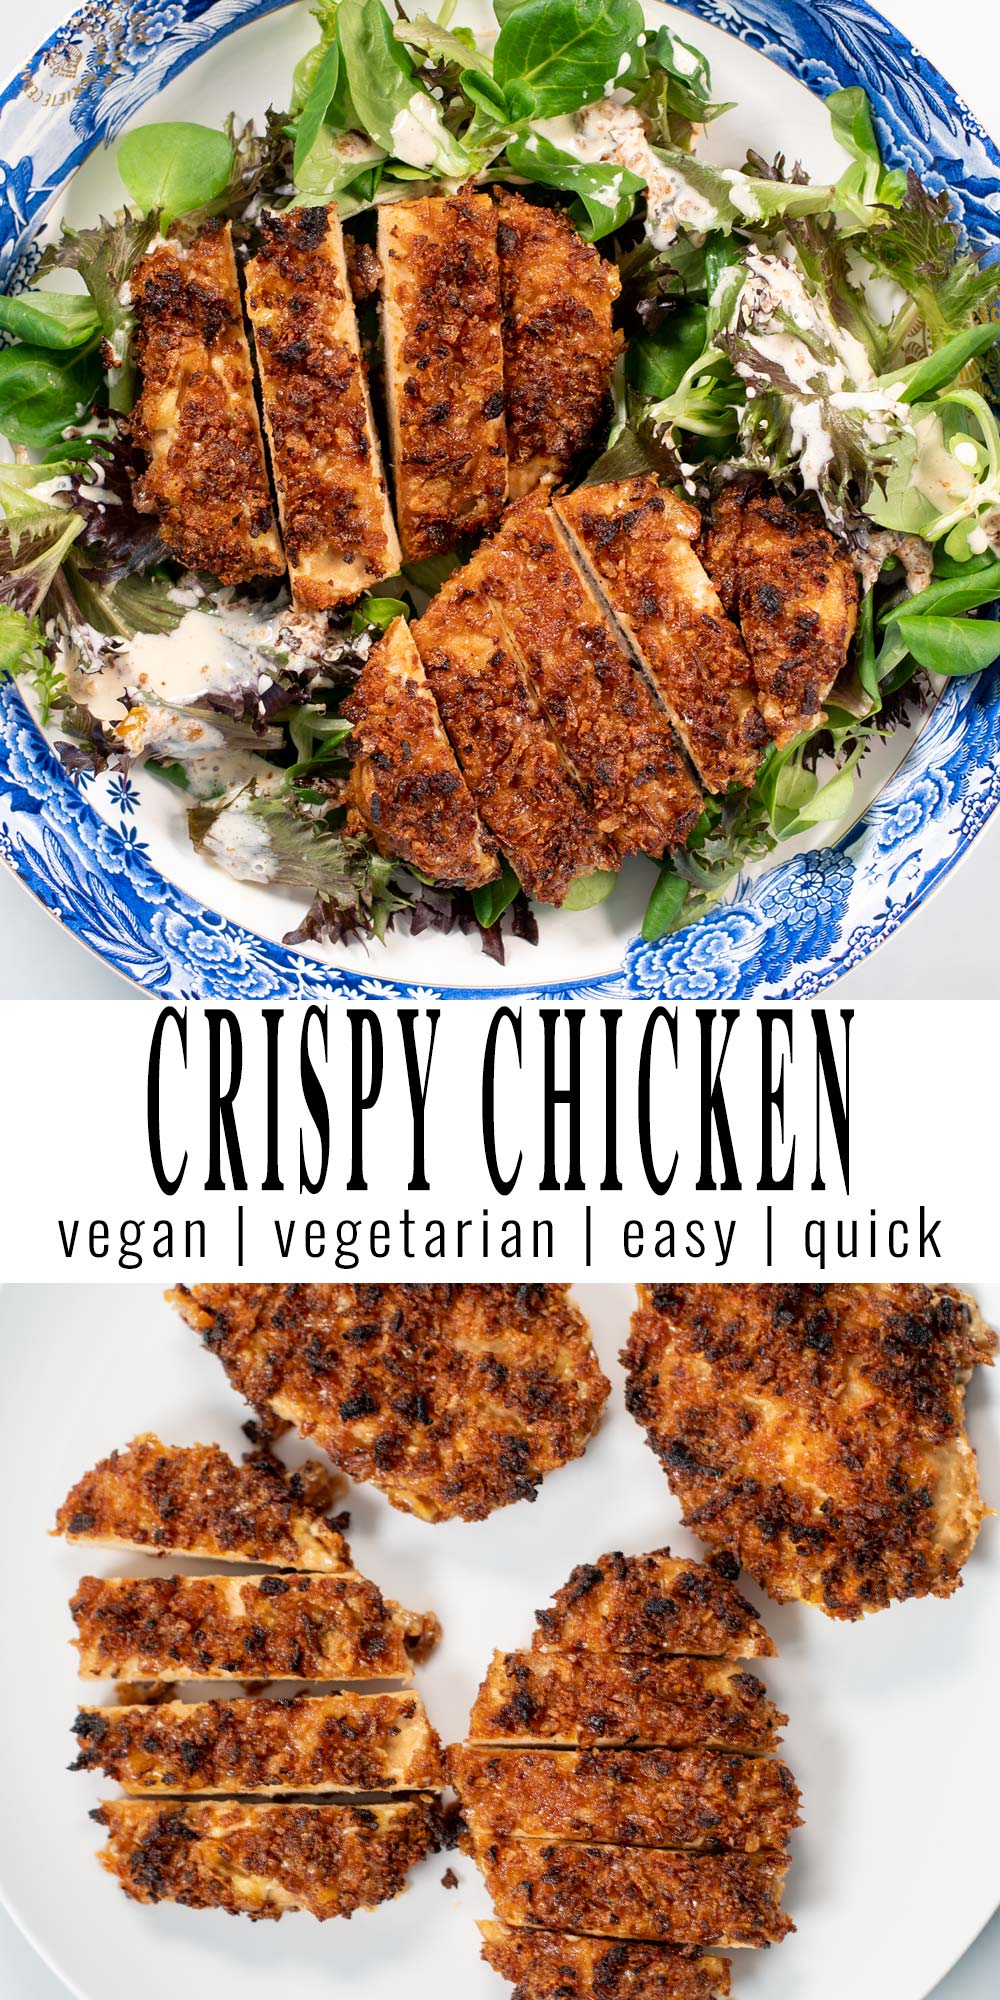 Collage of two photos of Crispy Chicken with recipe title text.